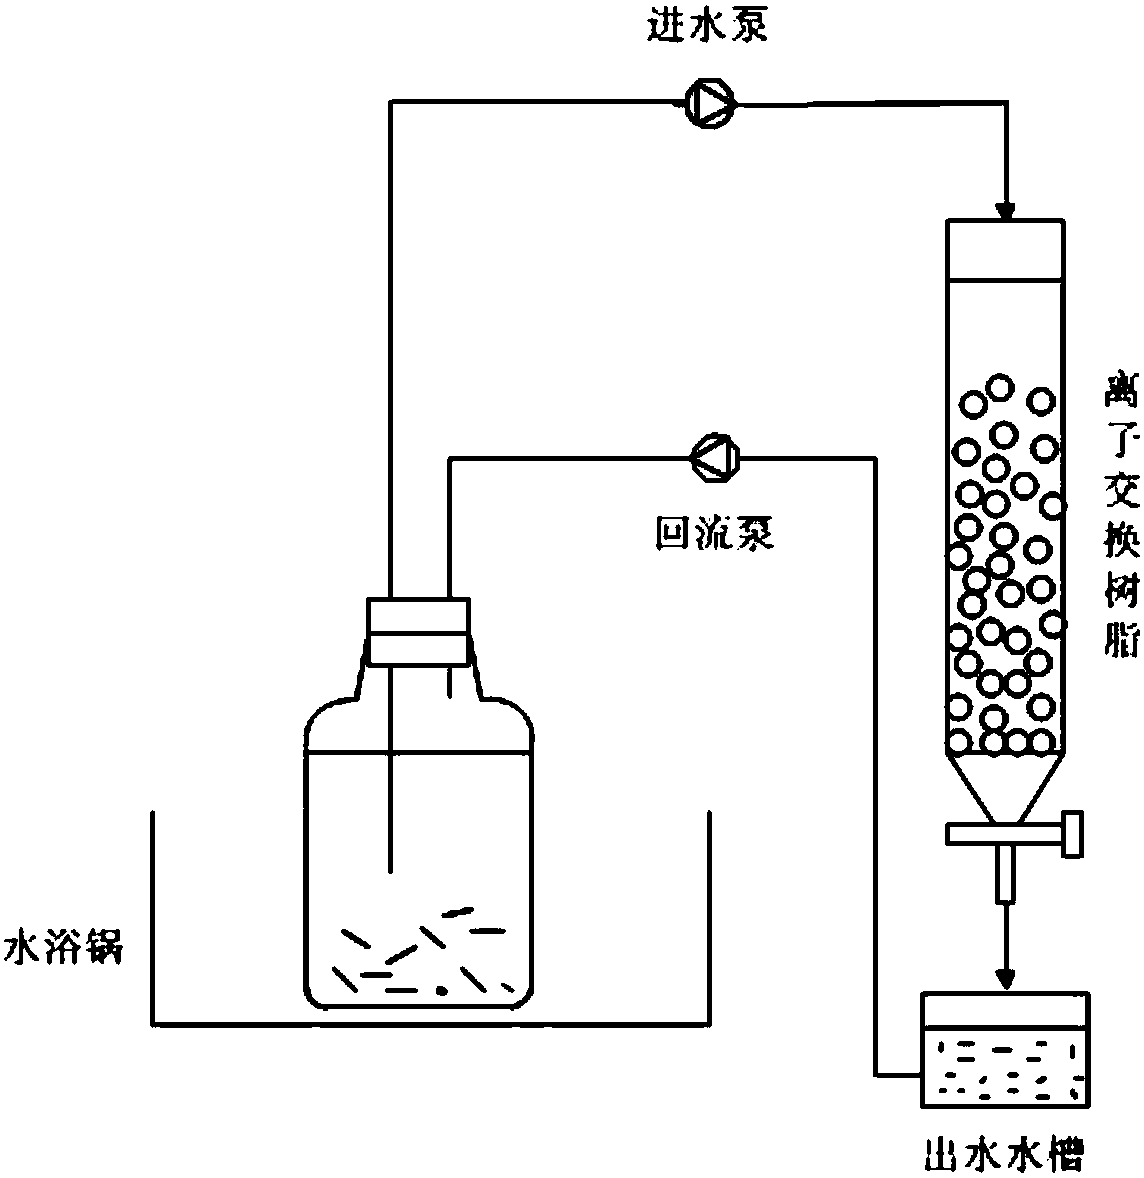 Method for recycling and treating hexanoic acid in anaerobic fermentation effluent